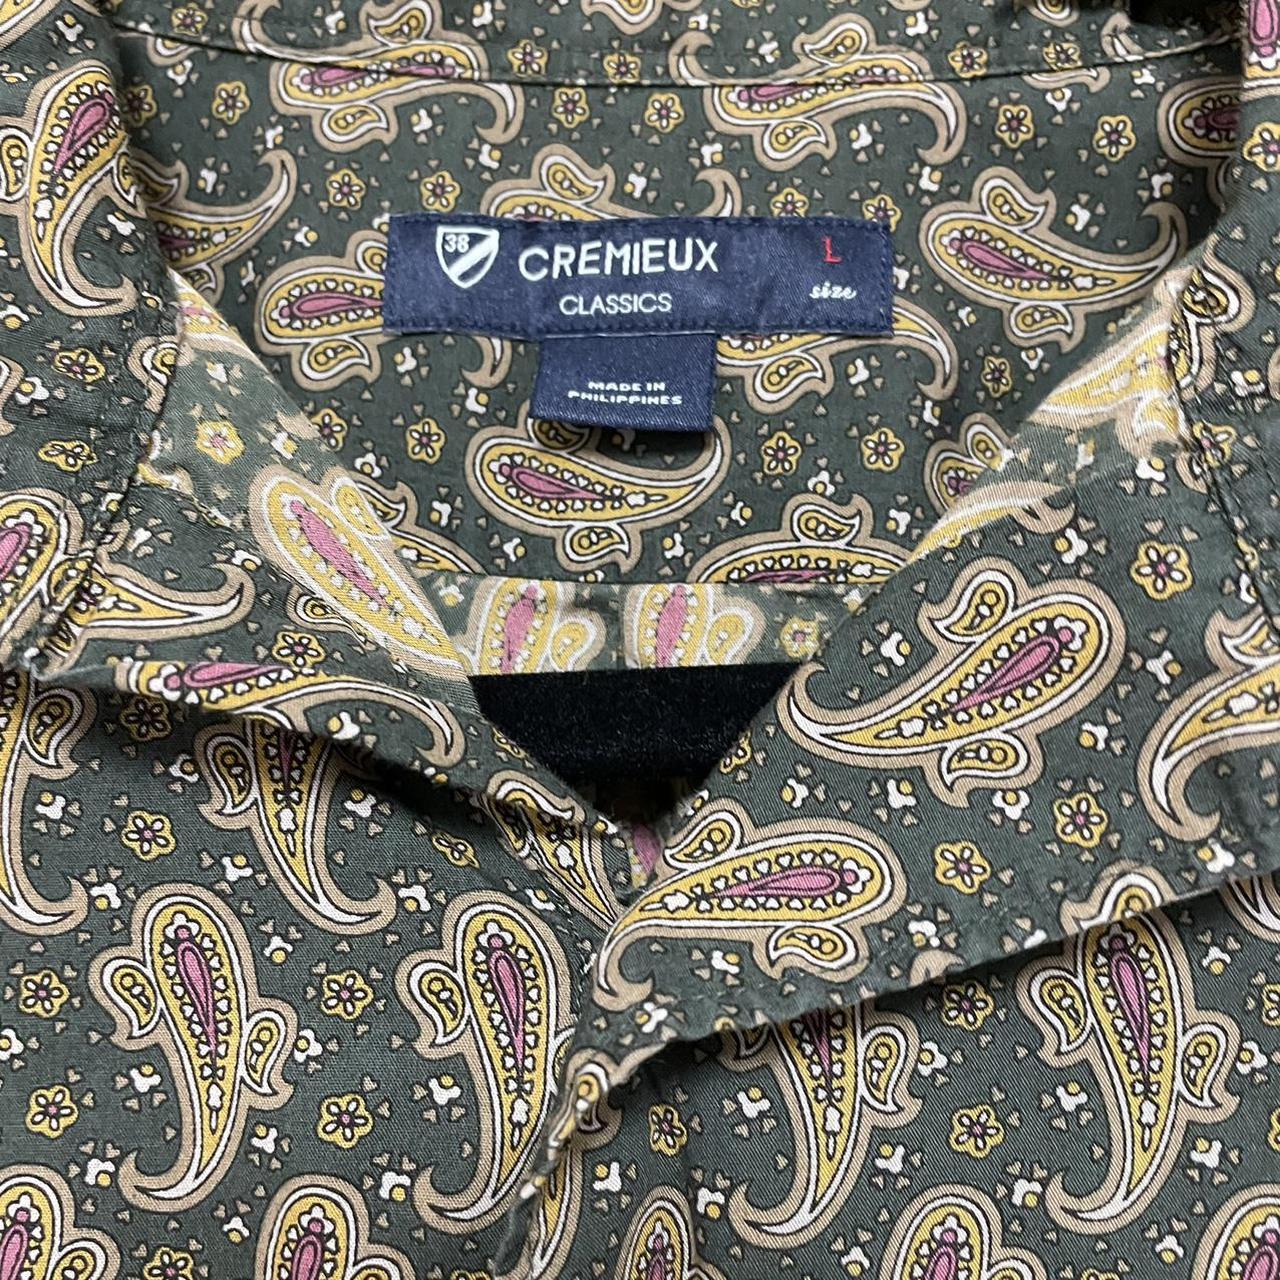 Product Image 2 - Cremieux
Green
Good condition
Size large
All-over print shirt,